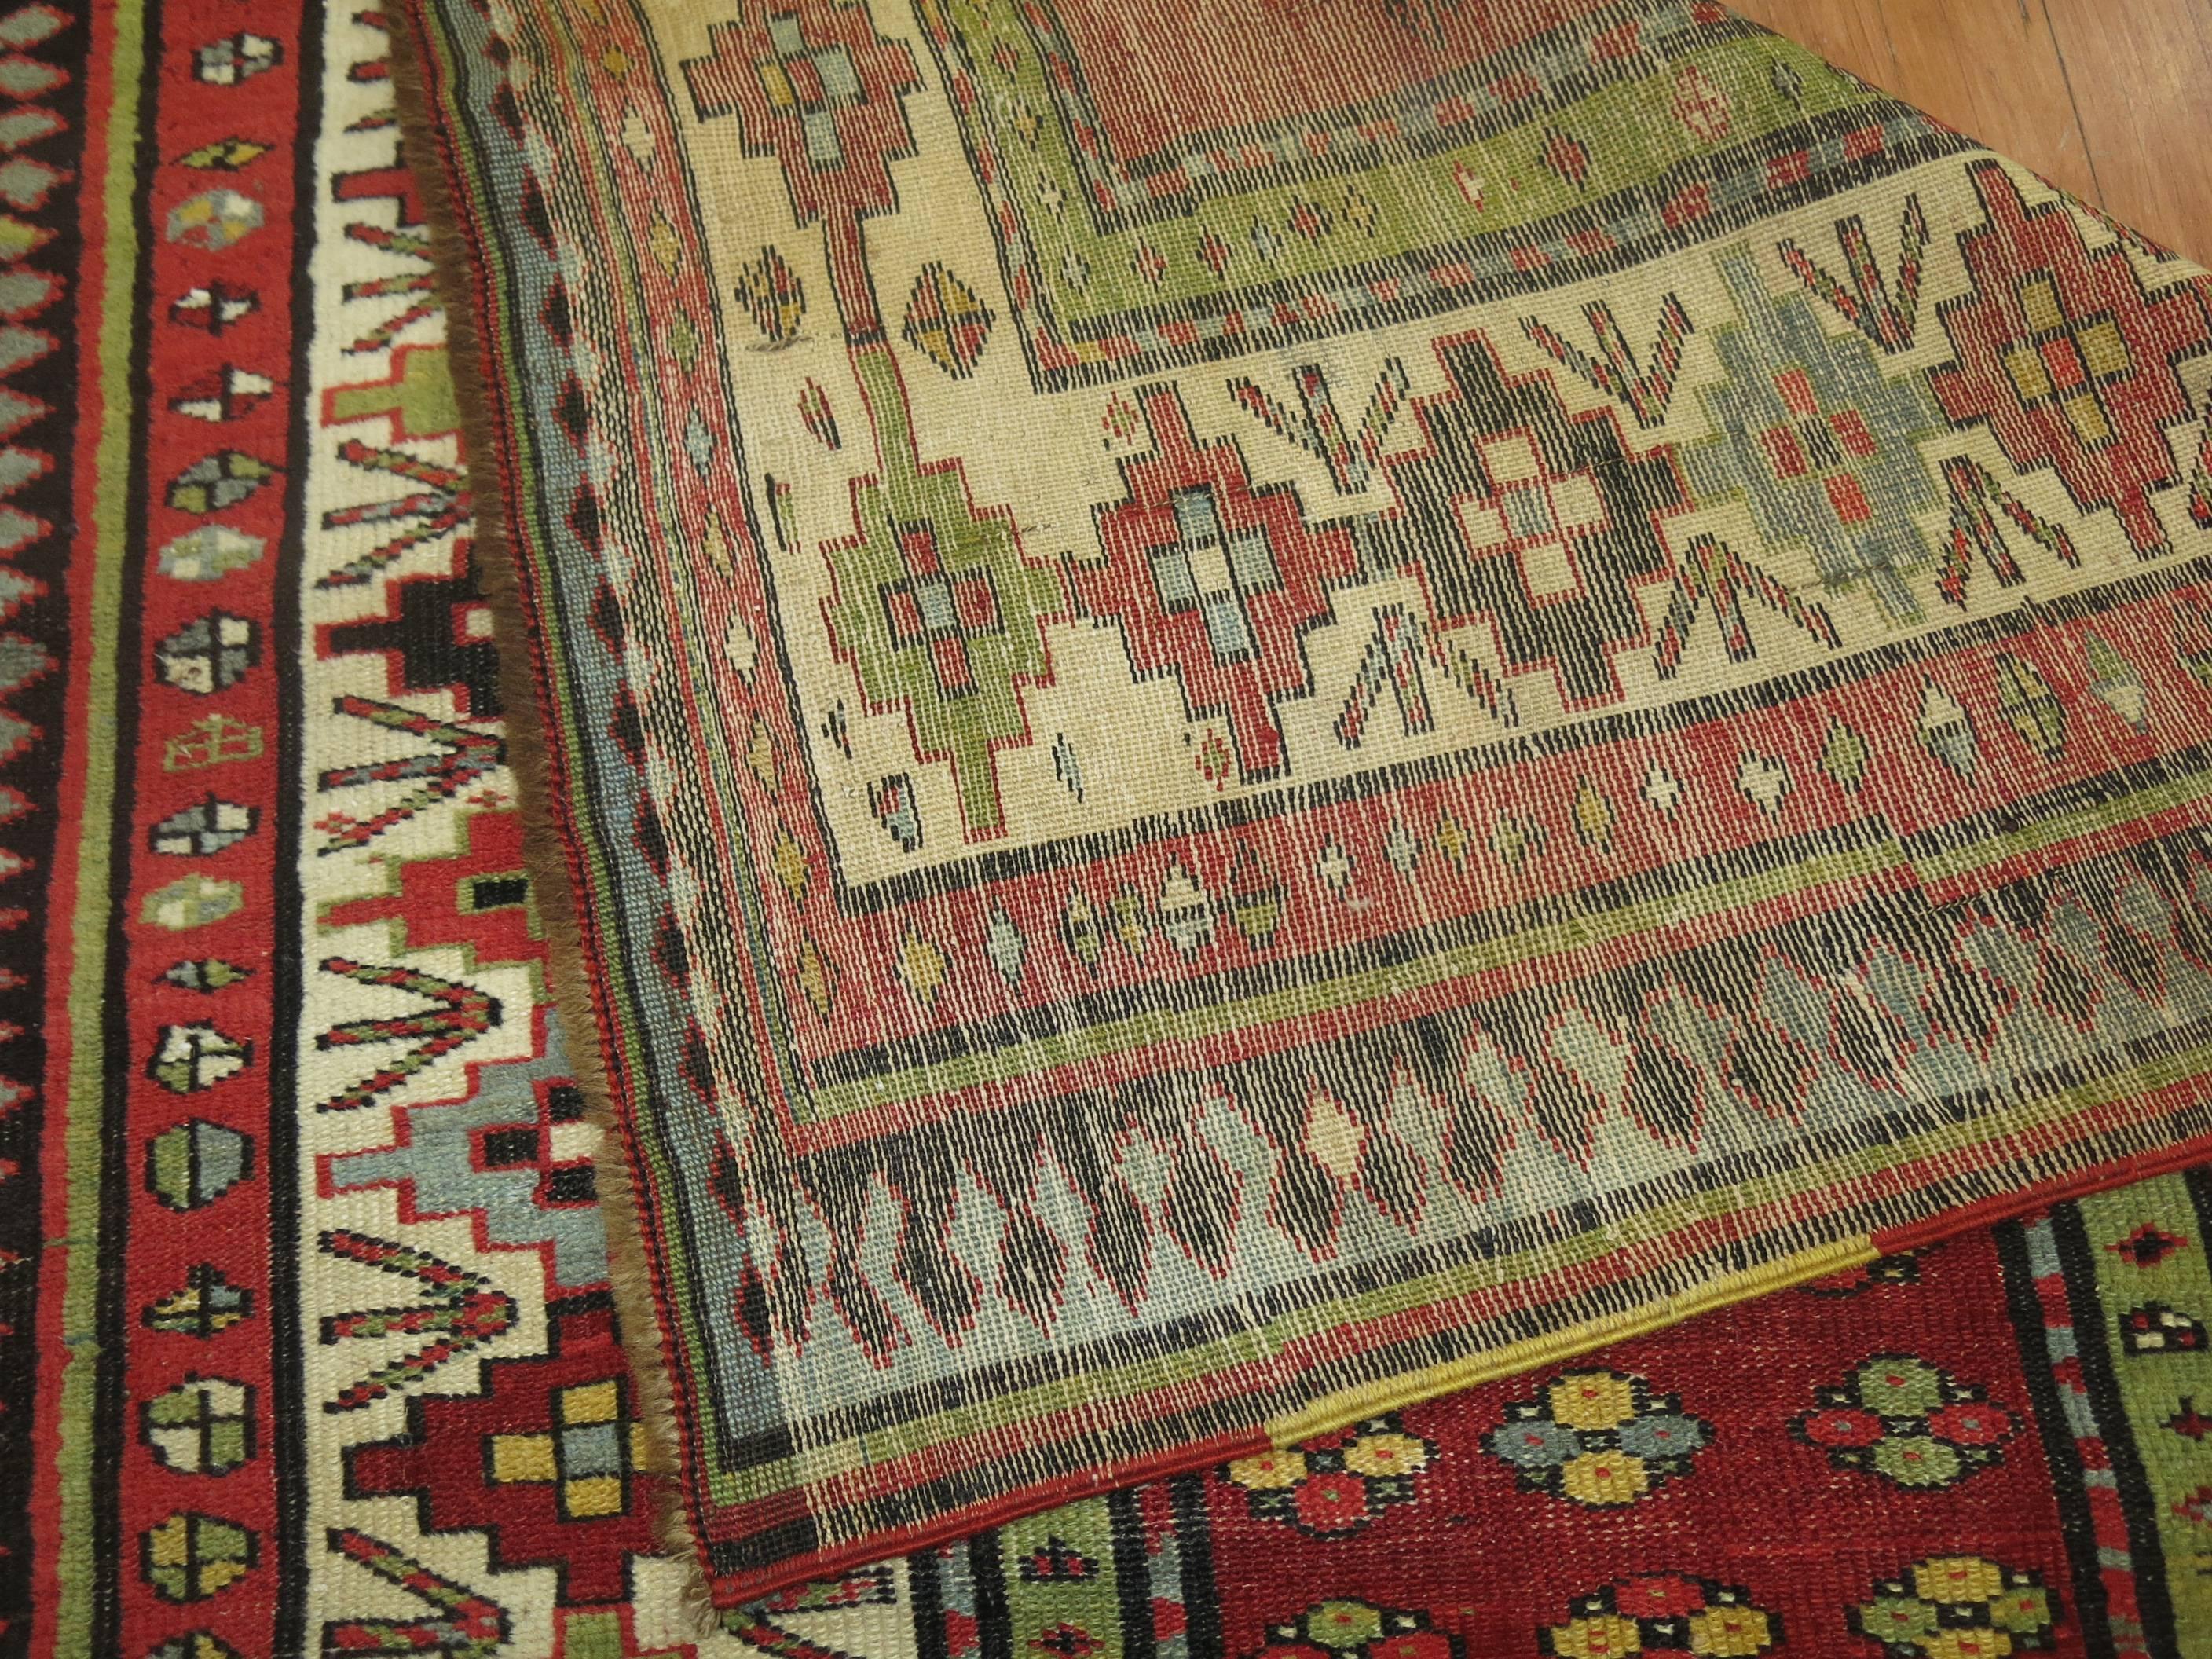 Lovely Caucasian Talish runner from the late 19th century in earth red, blue ivory red and yellow accents. The colorful side cords were added by the weaver too to give it more of a unique character,

circa 1900, measures: 3'5